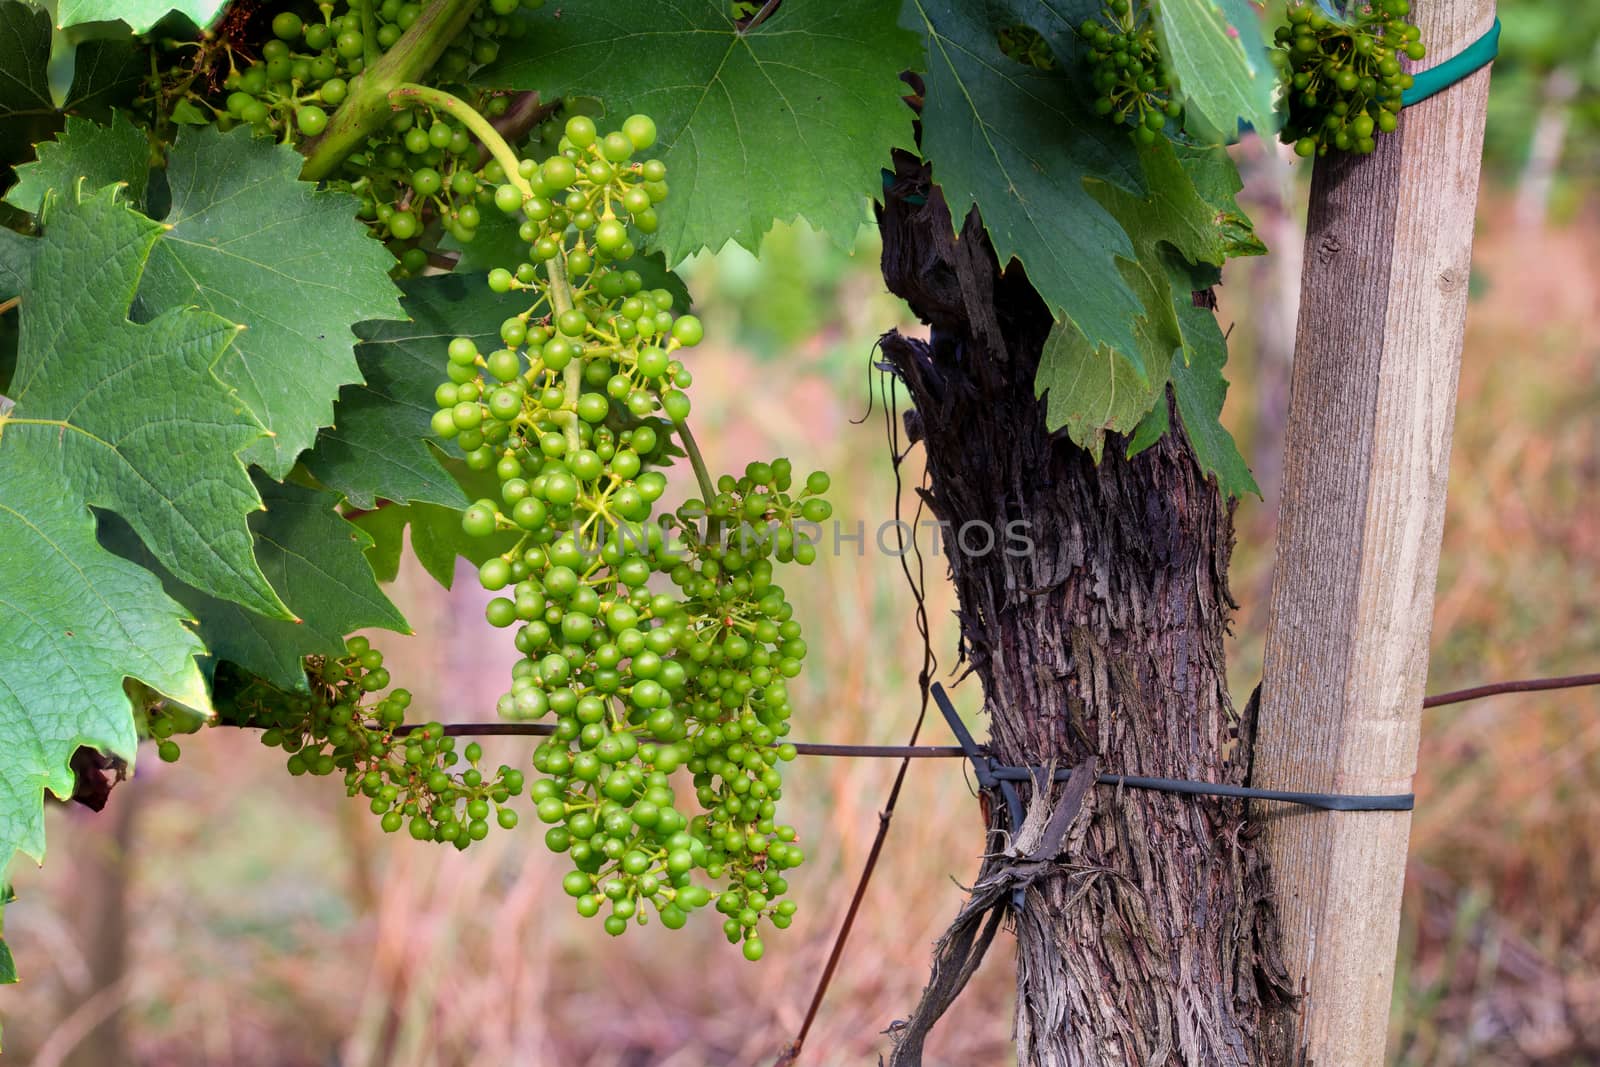 Green, unripe, young wine grapes in vineyard, early summer, close-up, grapes growing on vines in vine yard, Europe